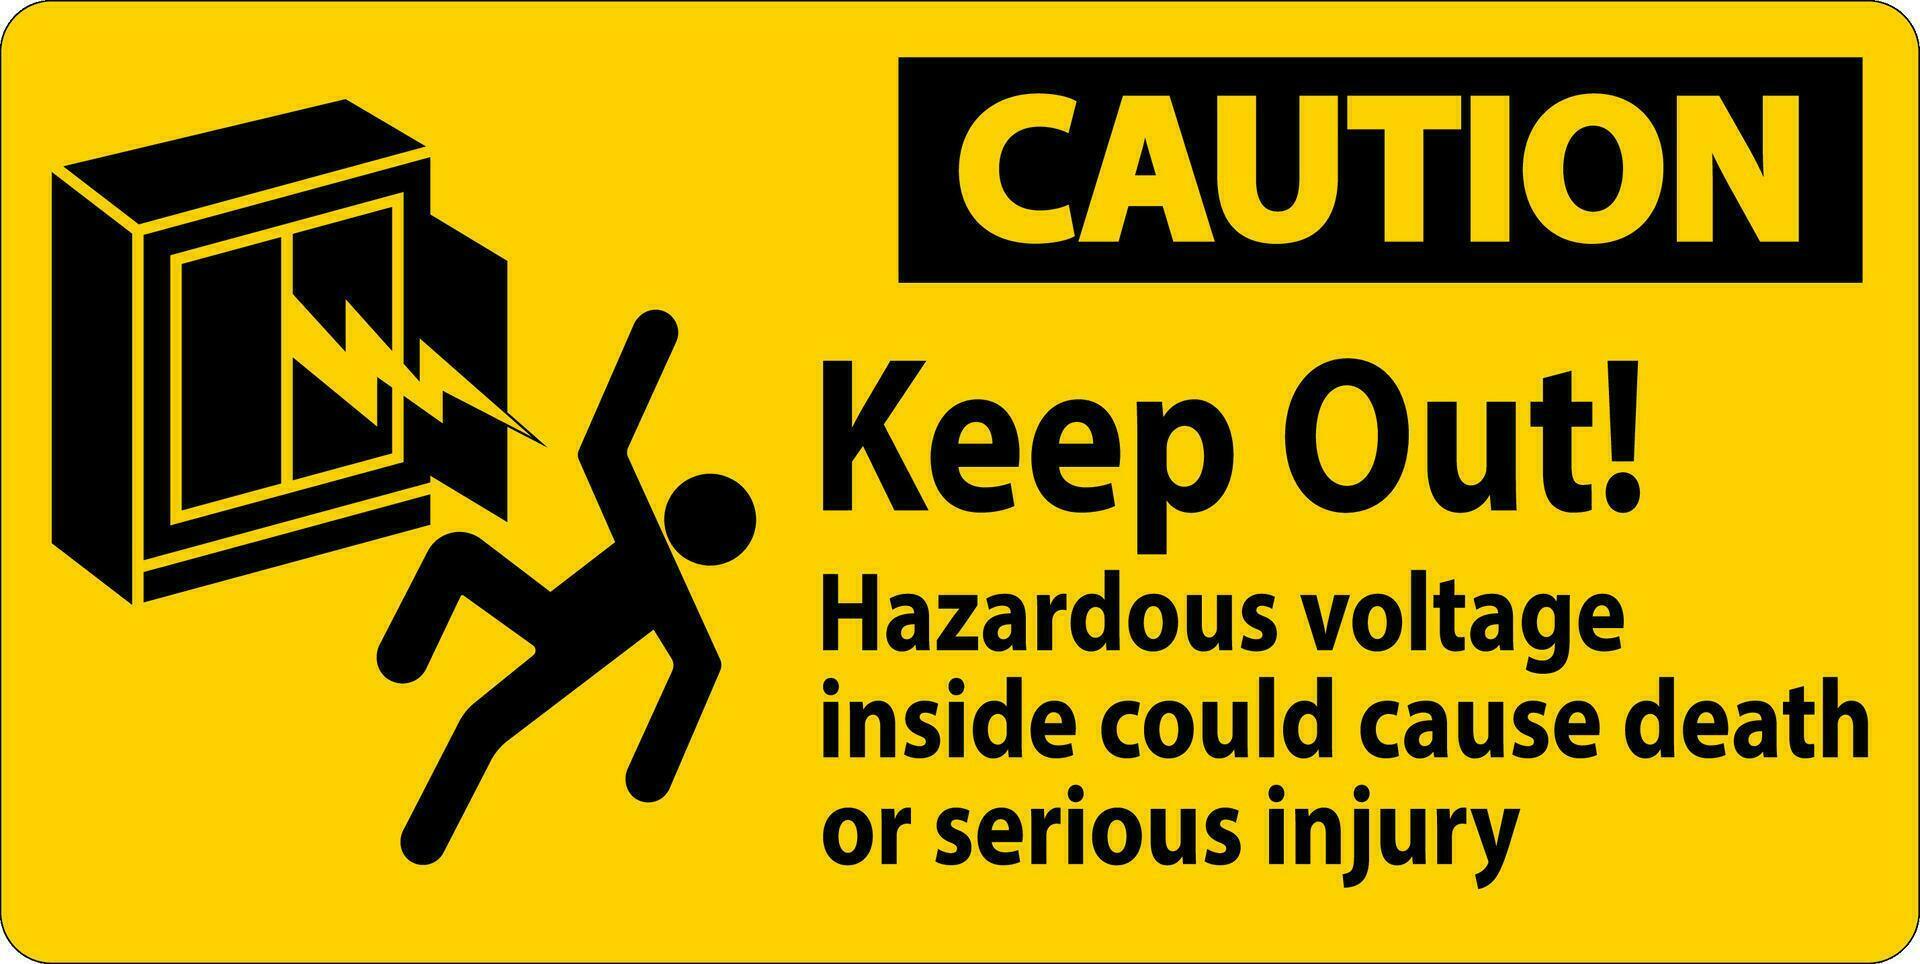 Caution Sign Keep Out Hazardous Voltage Inside, Could Cause Death Or Serious Injury vector